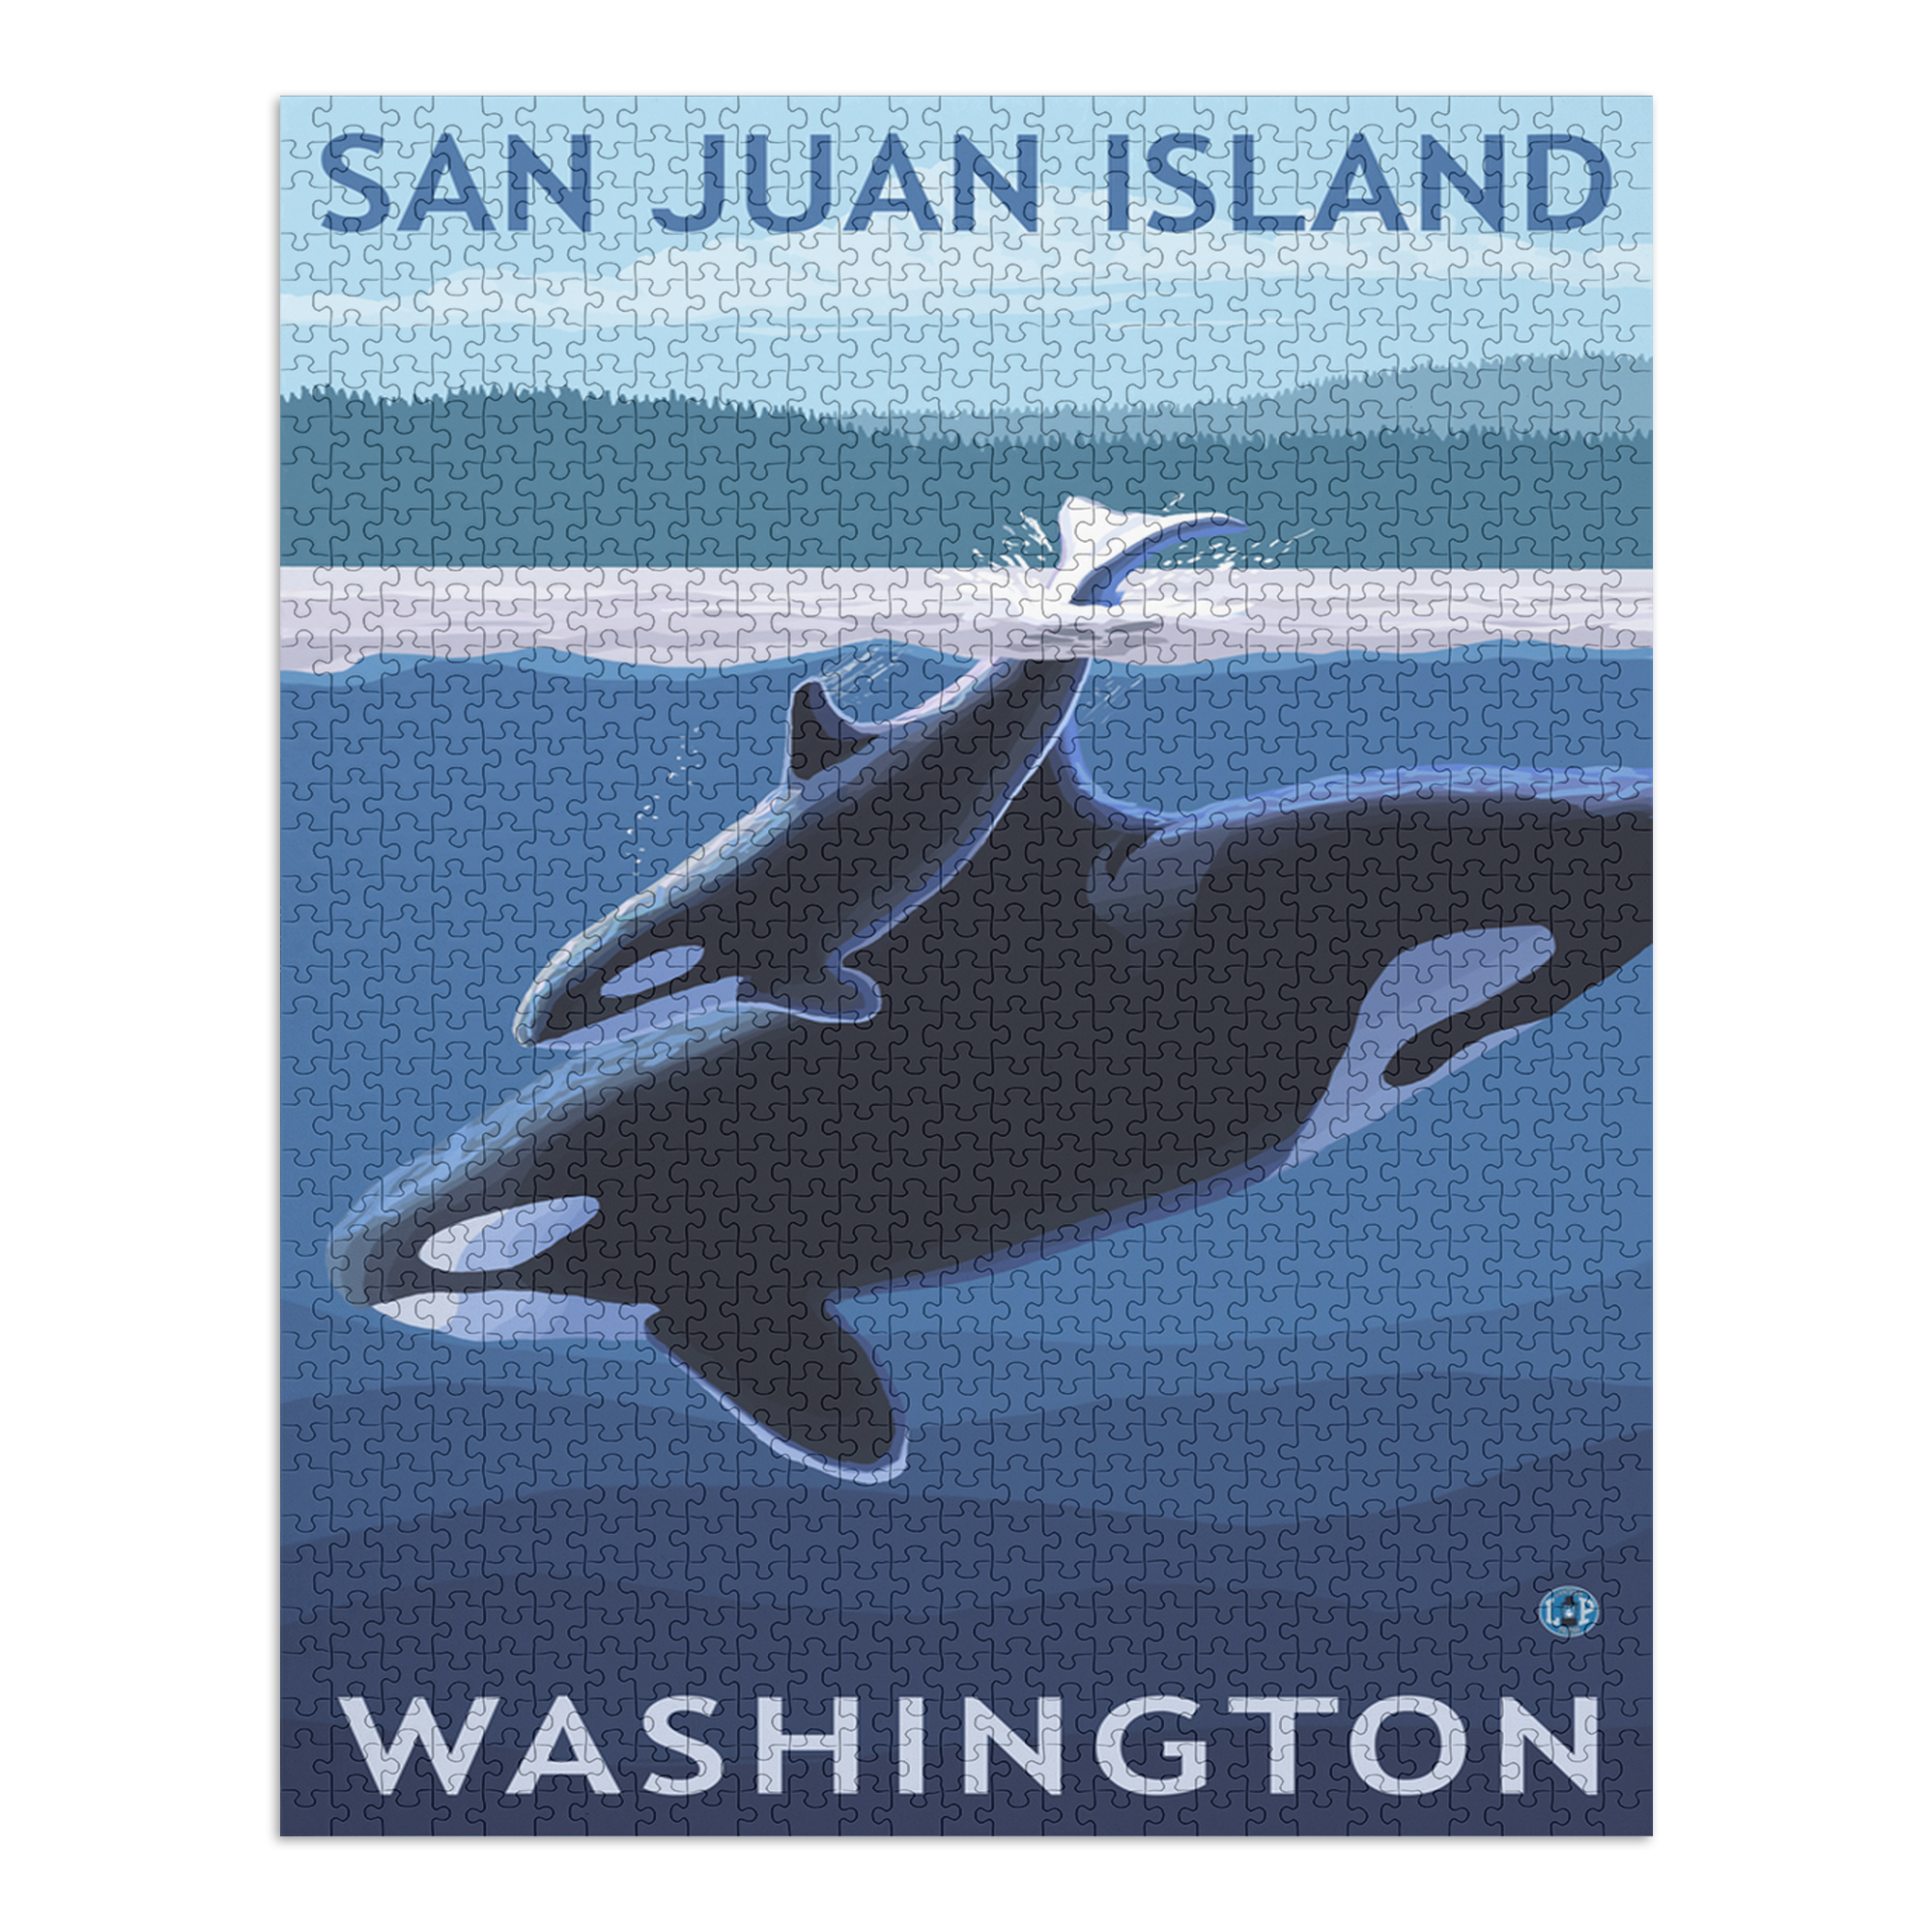 San Juan Island, Washington, Orca and Calf (1000 Piece Puzzle, Size 19x27, Challenging Jigsaw Puzzle for Adults and Family, Made in USA) - image 2 of 4